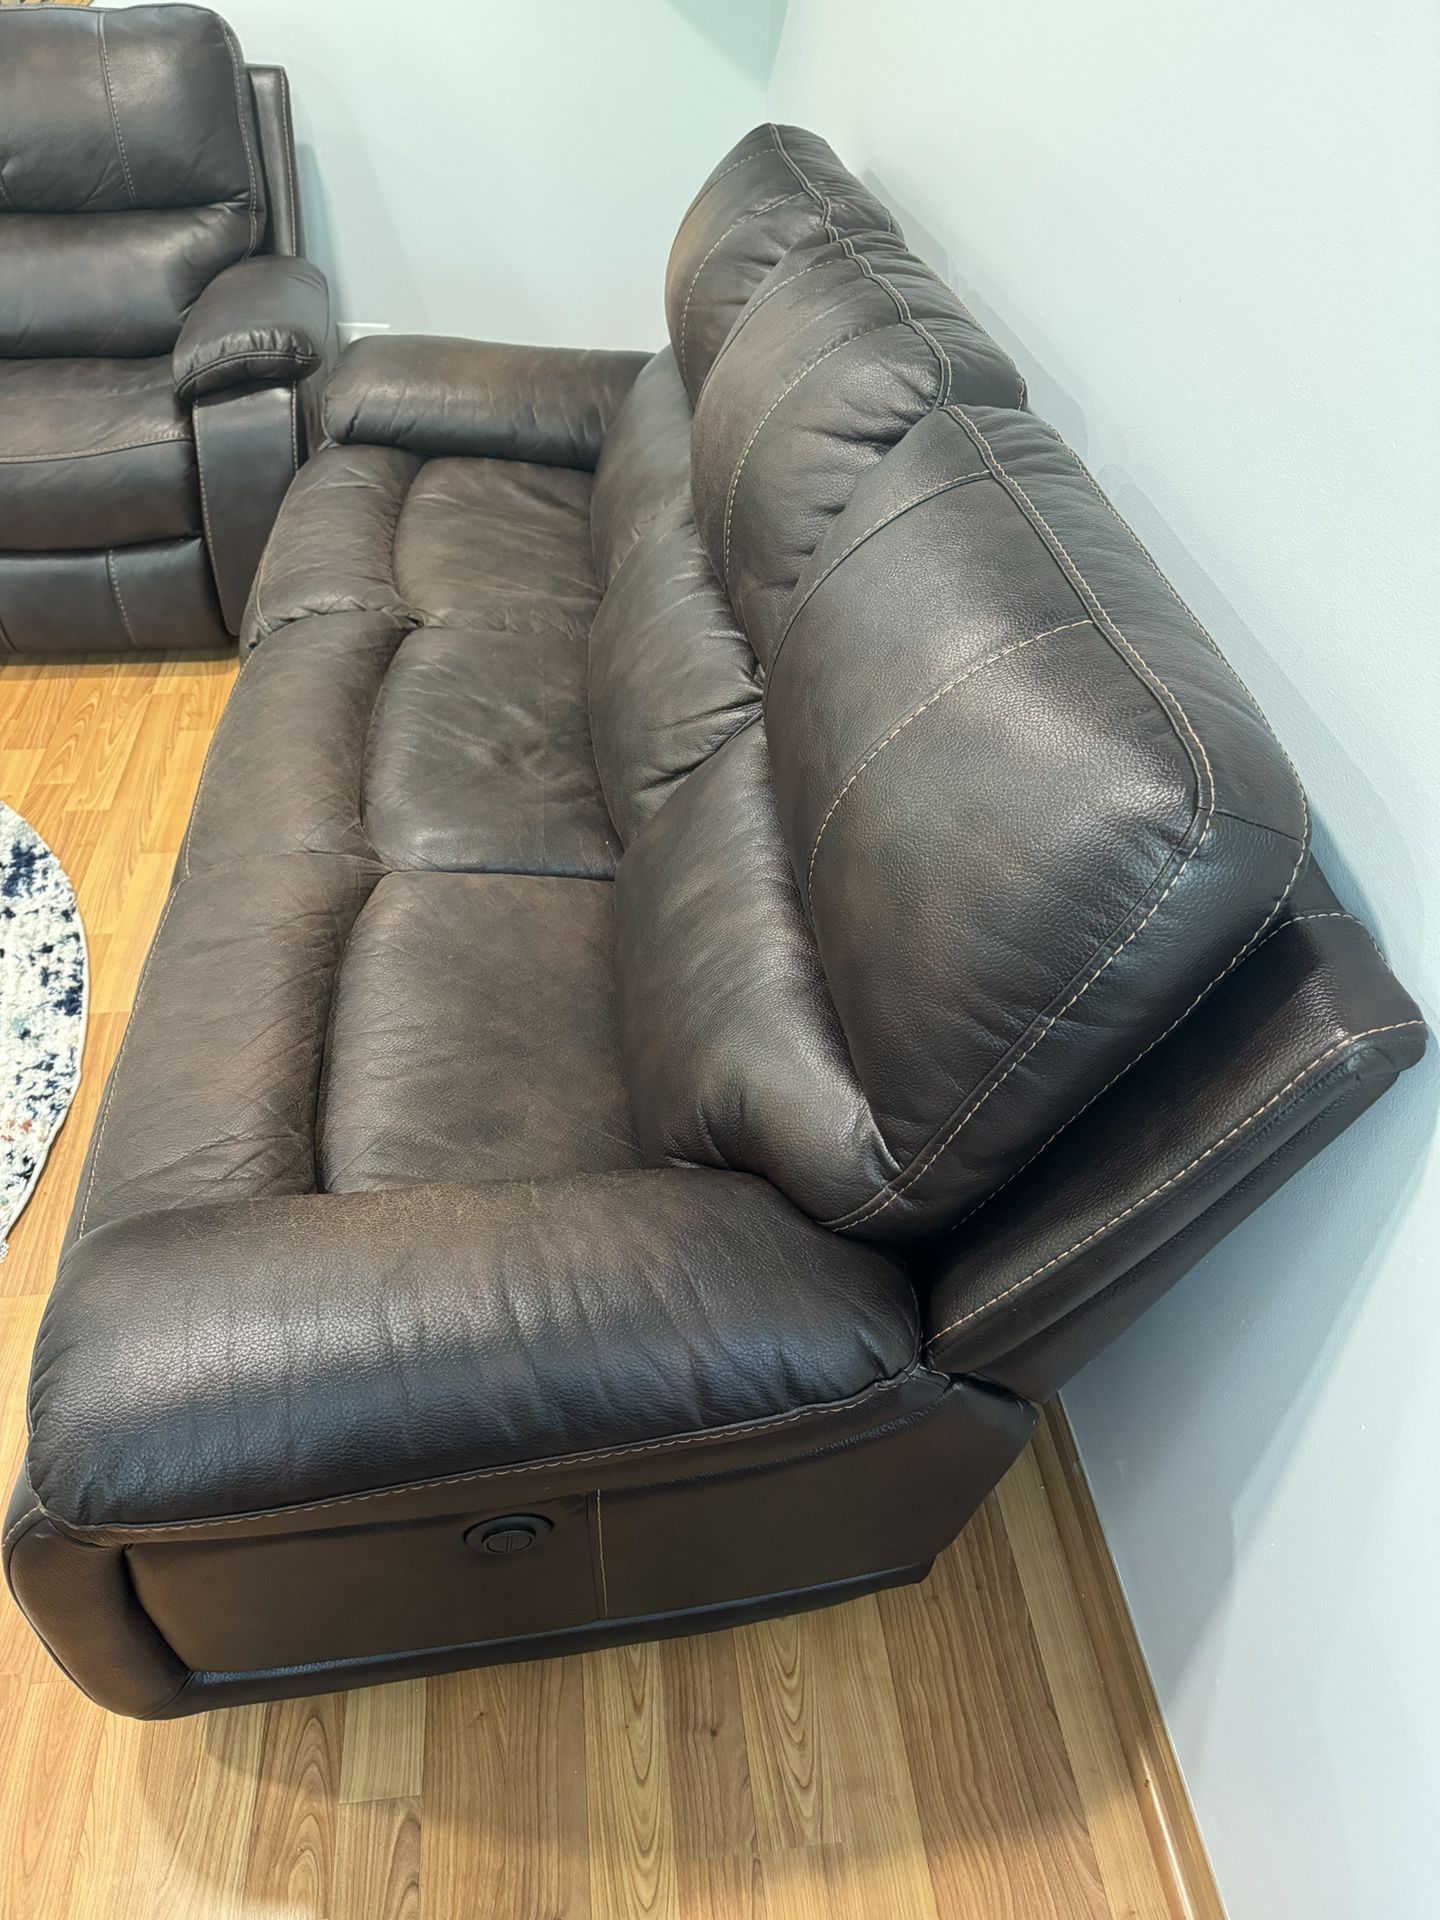 Recliners Couch 